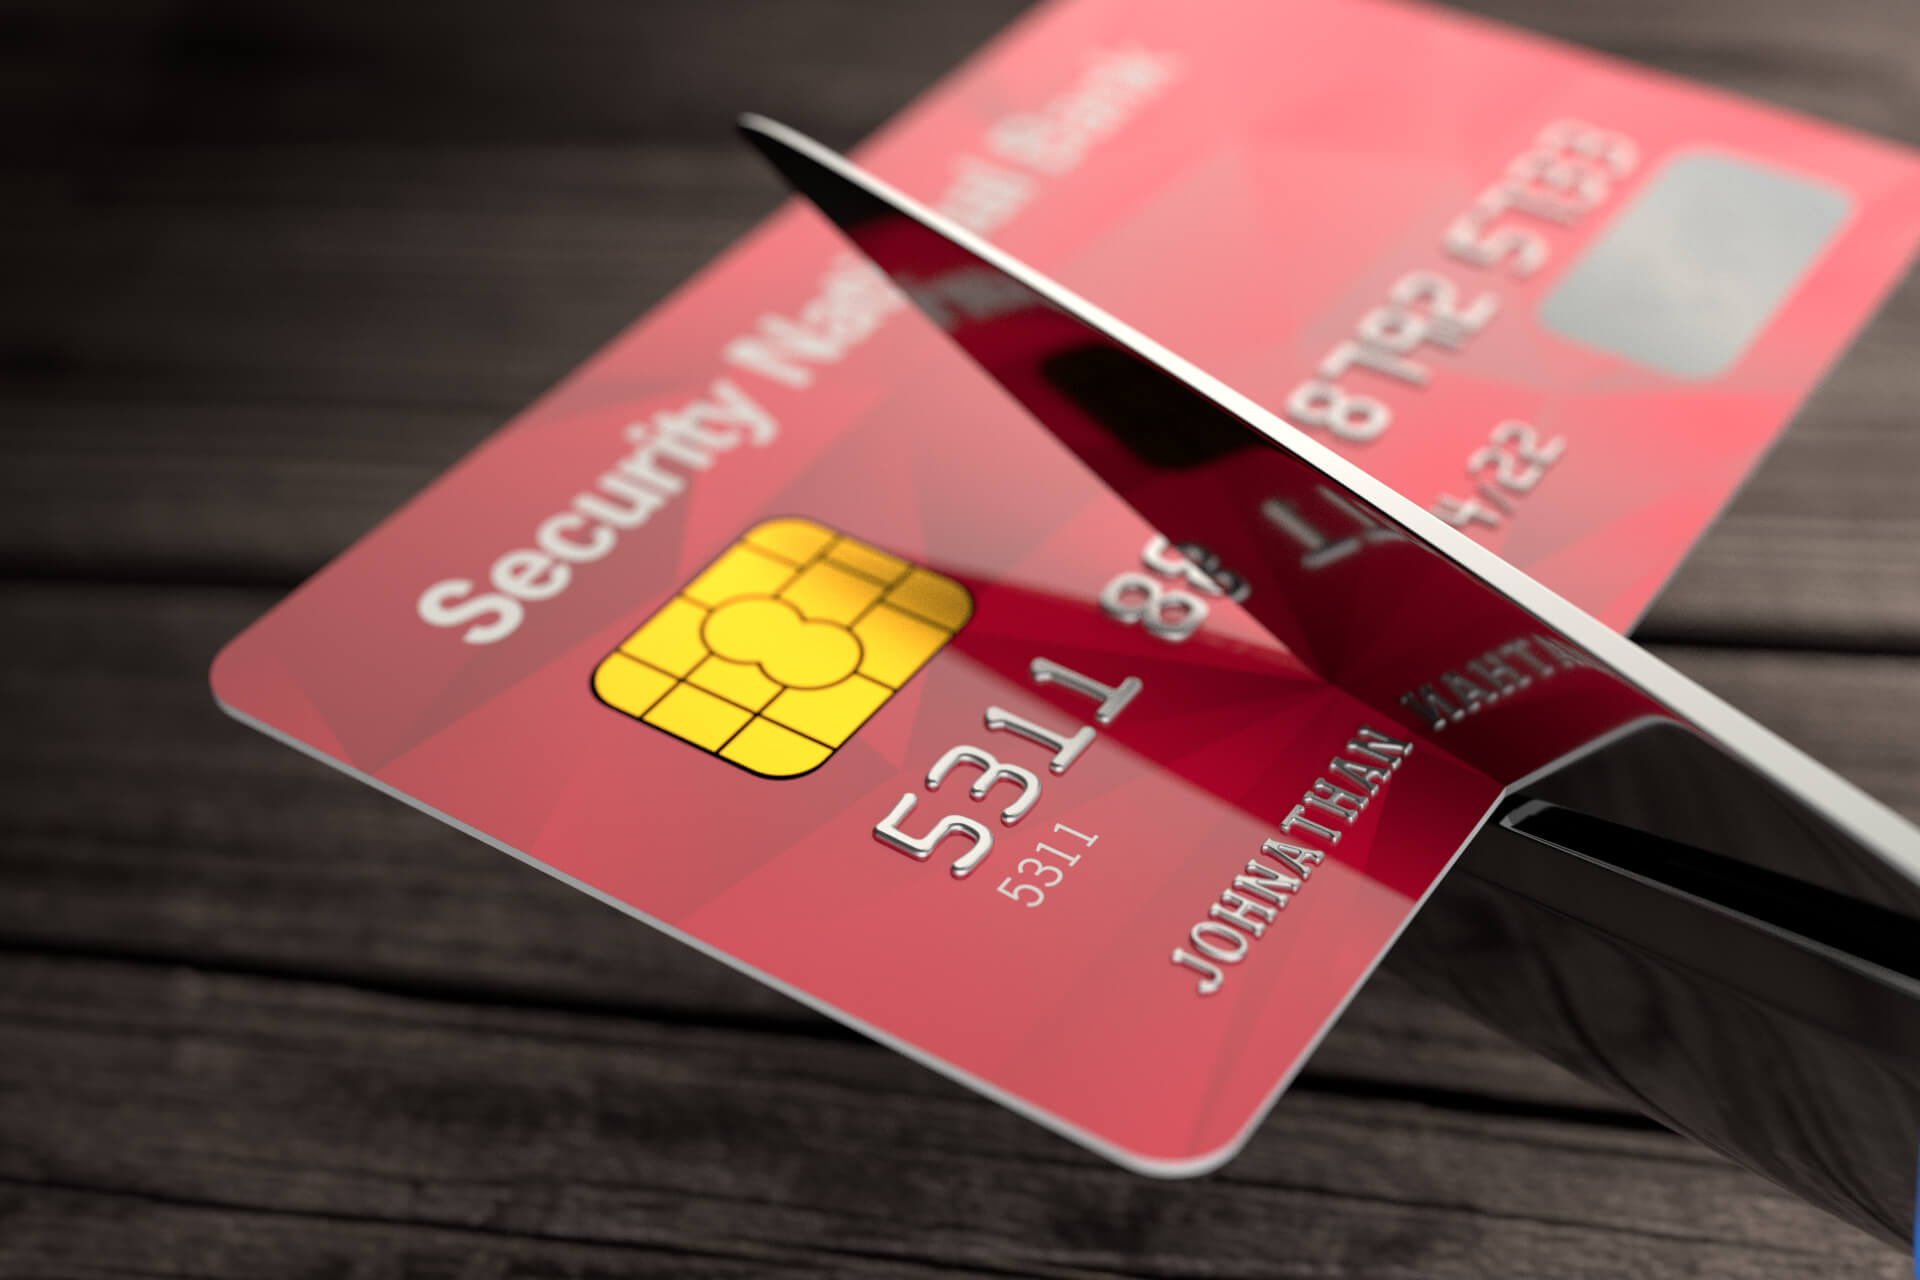 Credit card cut by scissors free image download